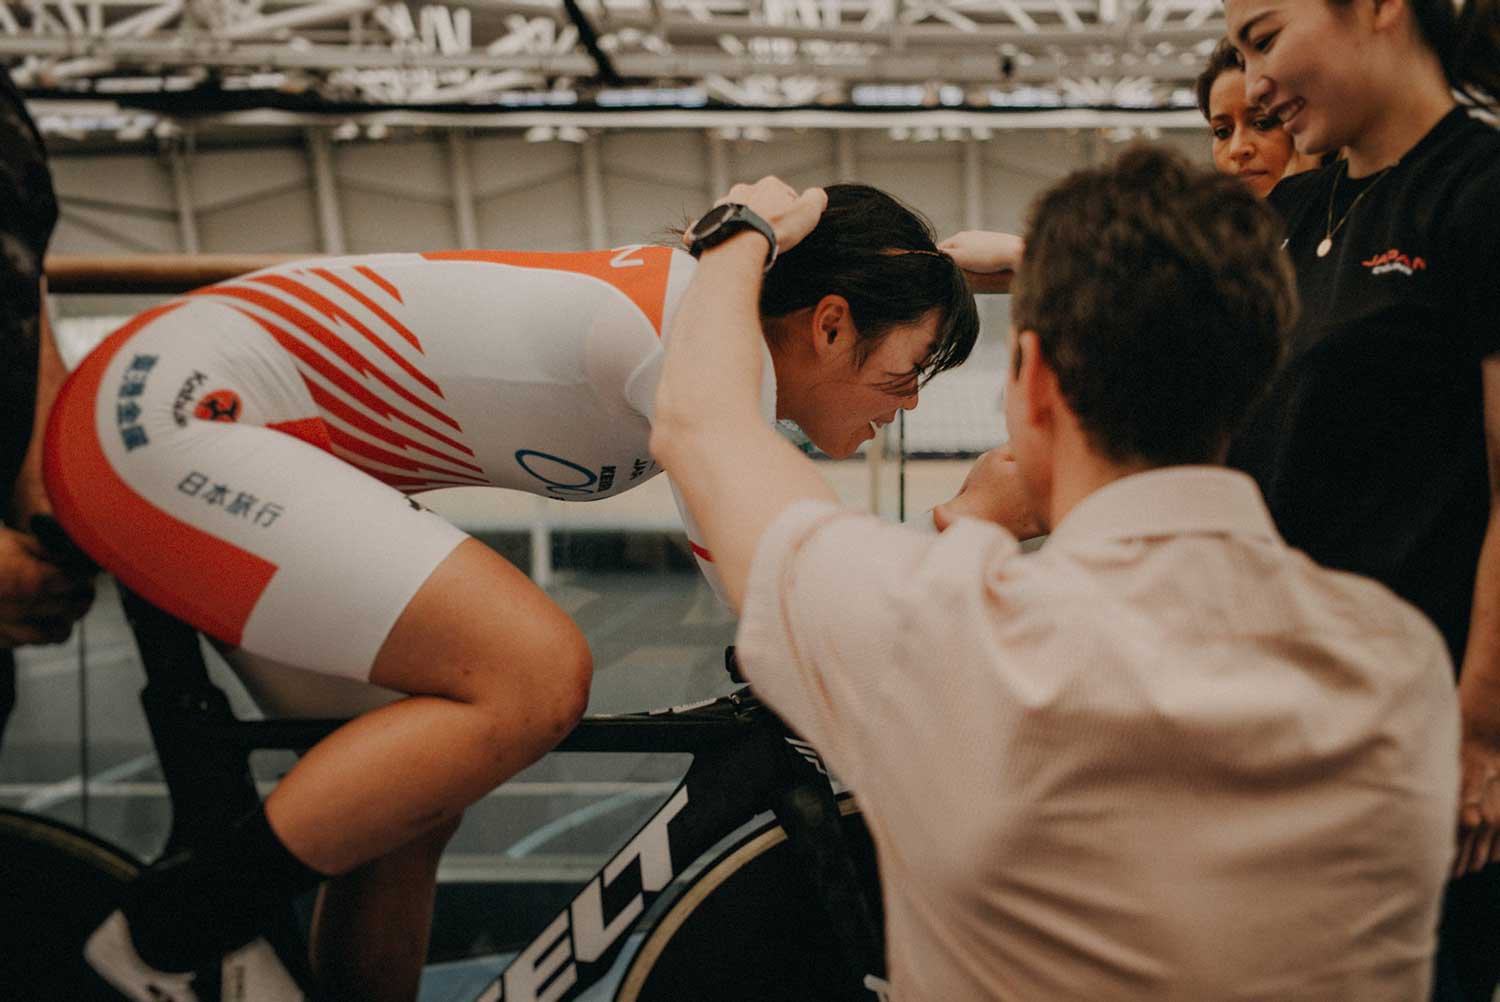 Cycling biomechanist adjusts body position of Japanese track cyclist during training session at velodrome